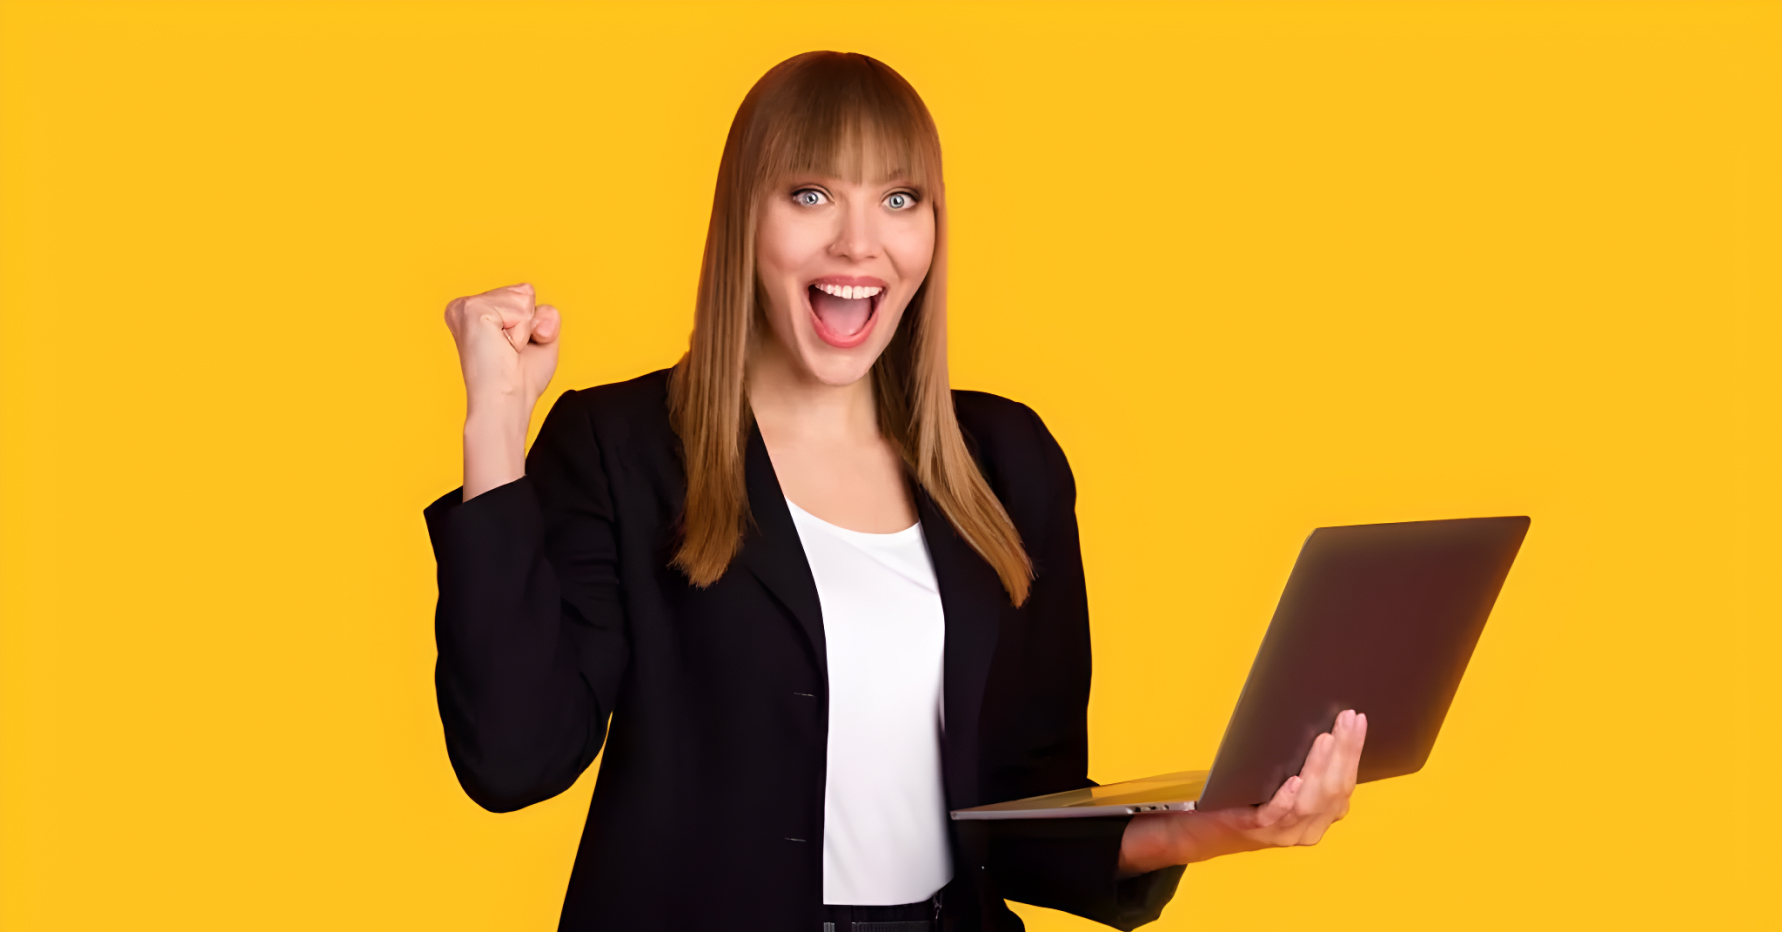 Photograph of a sales leader raising a fist in excitement and holding a laptop